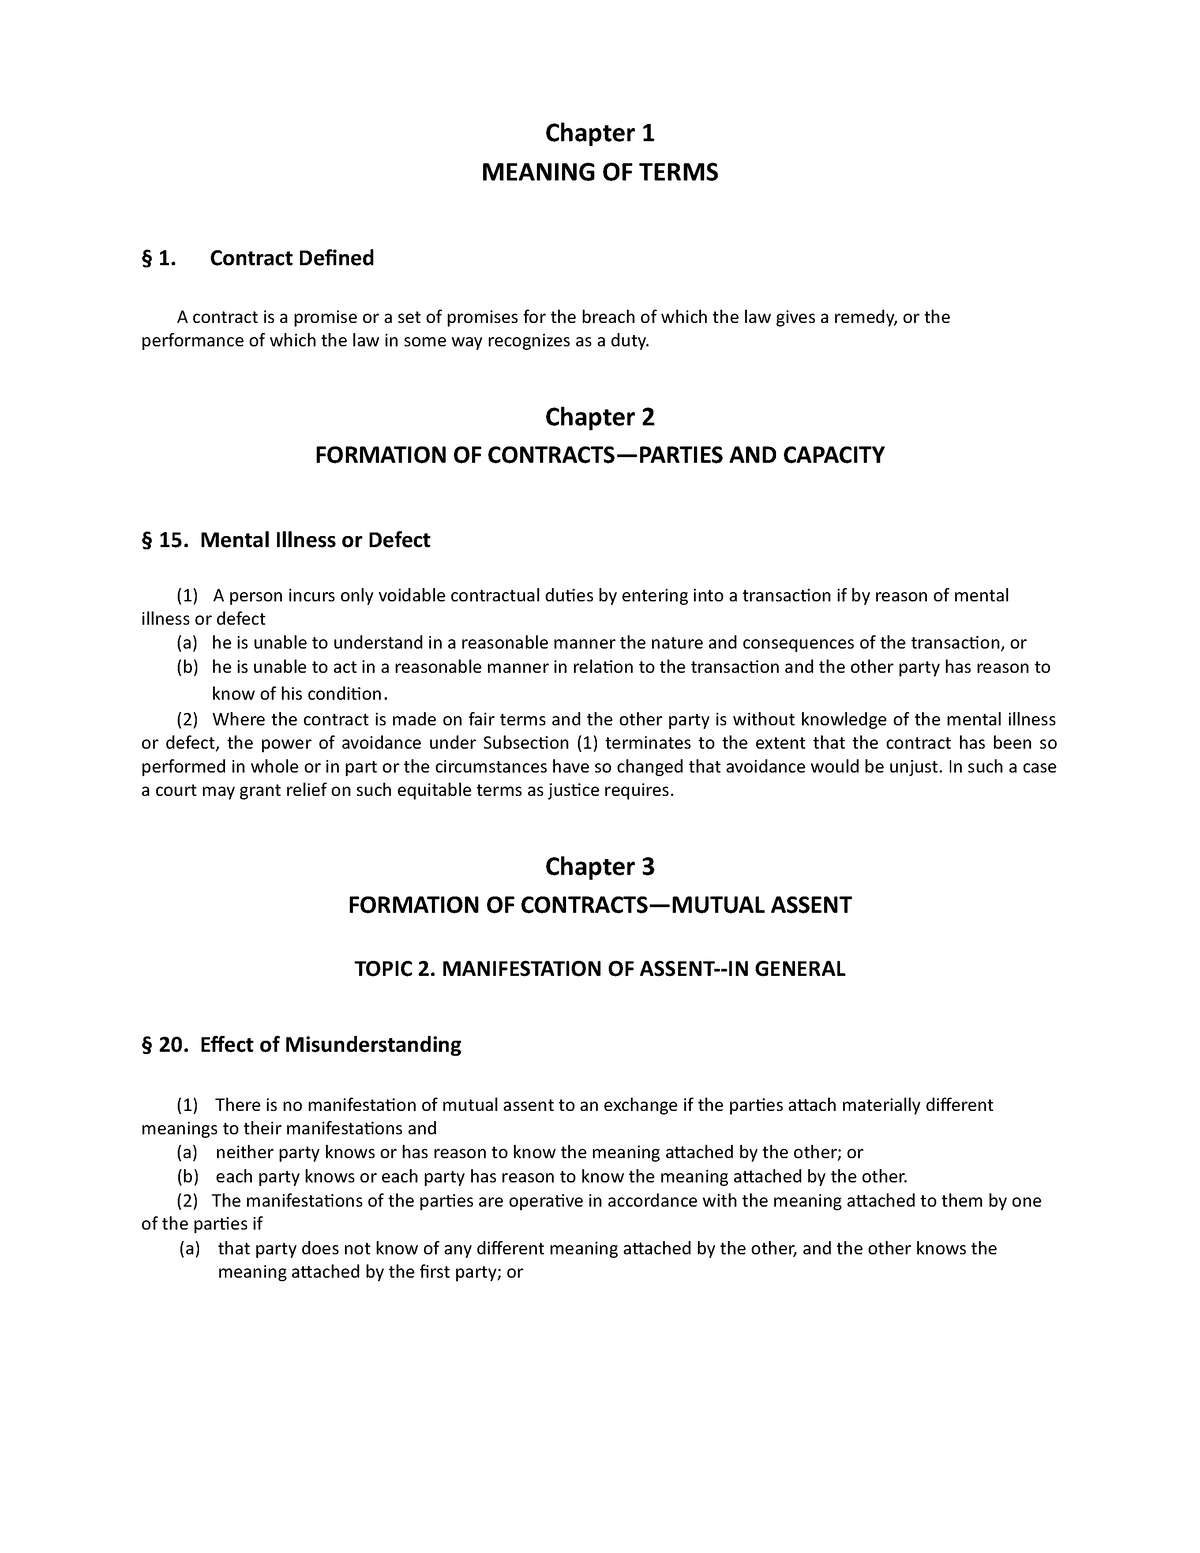 restatement-outline-chapter-1-meaning-of-terms-1-contract-defined